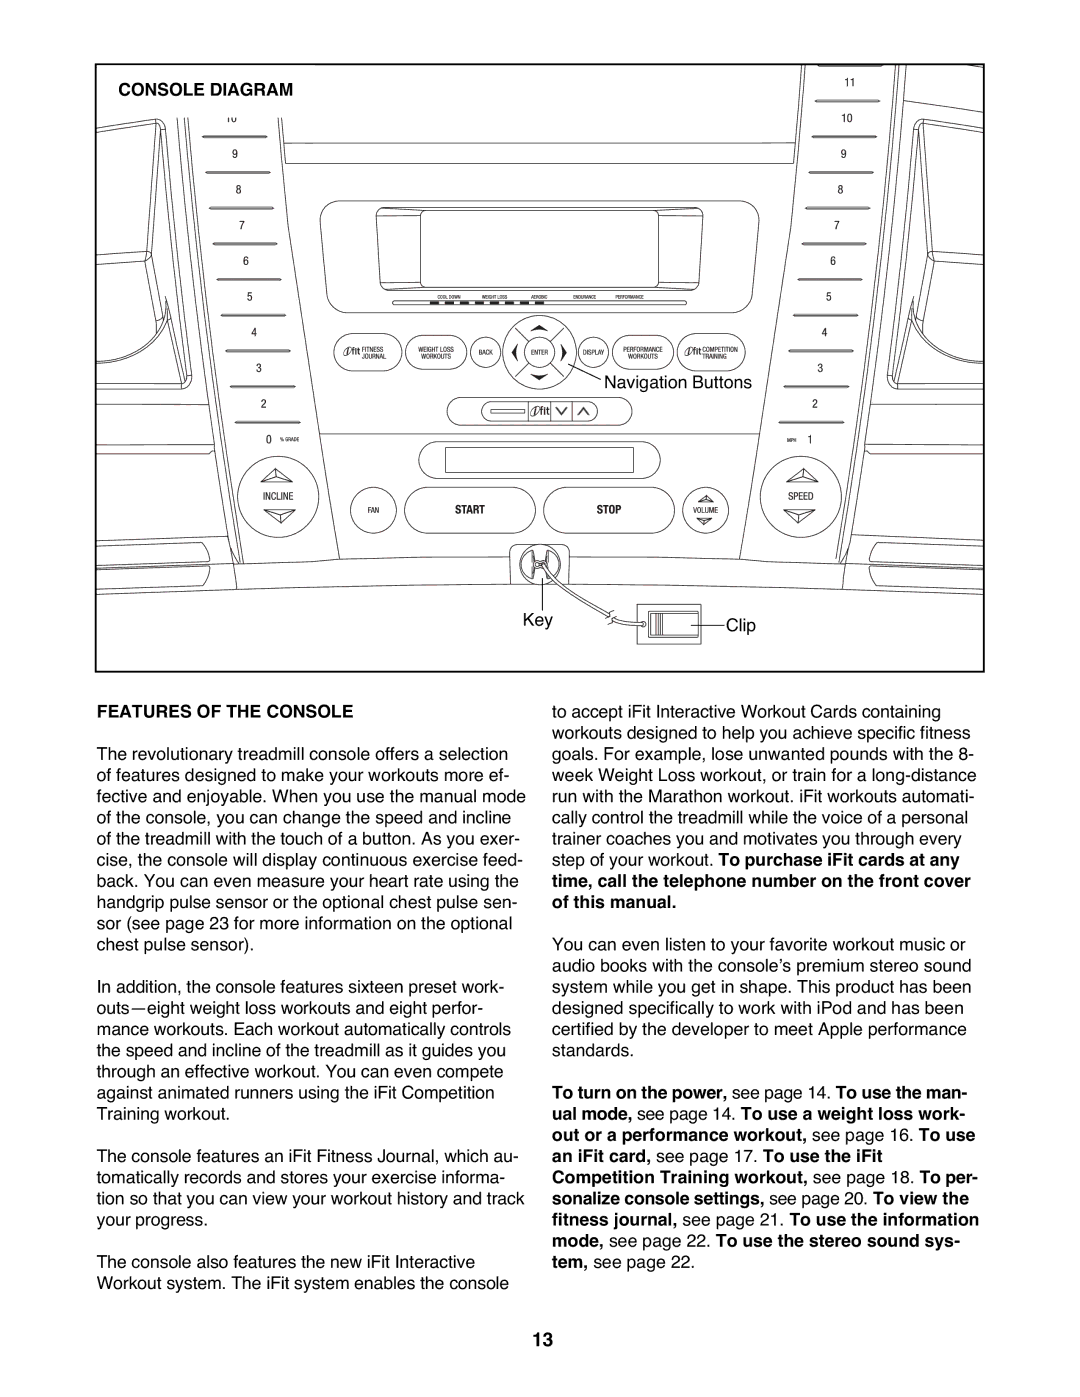 ProForm PFTL99908.0 user manual Console Diagram, Navigation Buttons, Key Clip, Features of the Console 